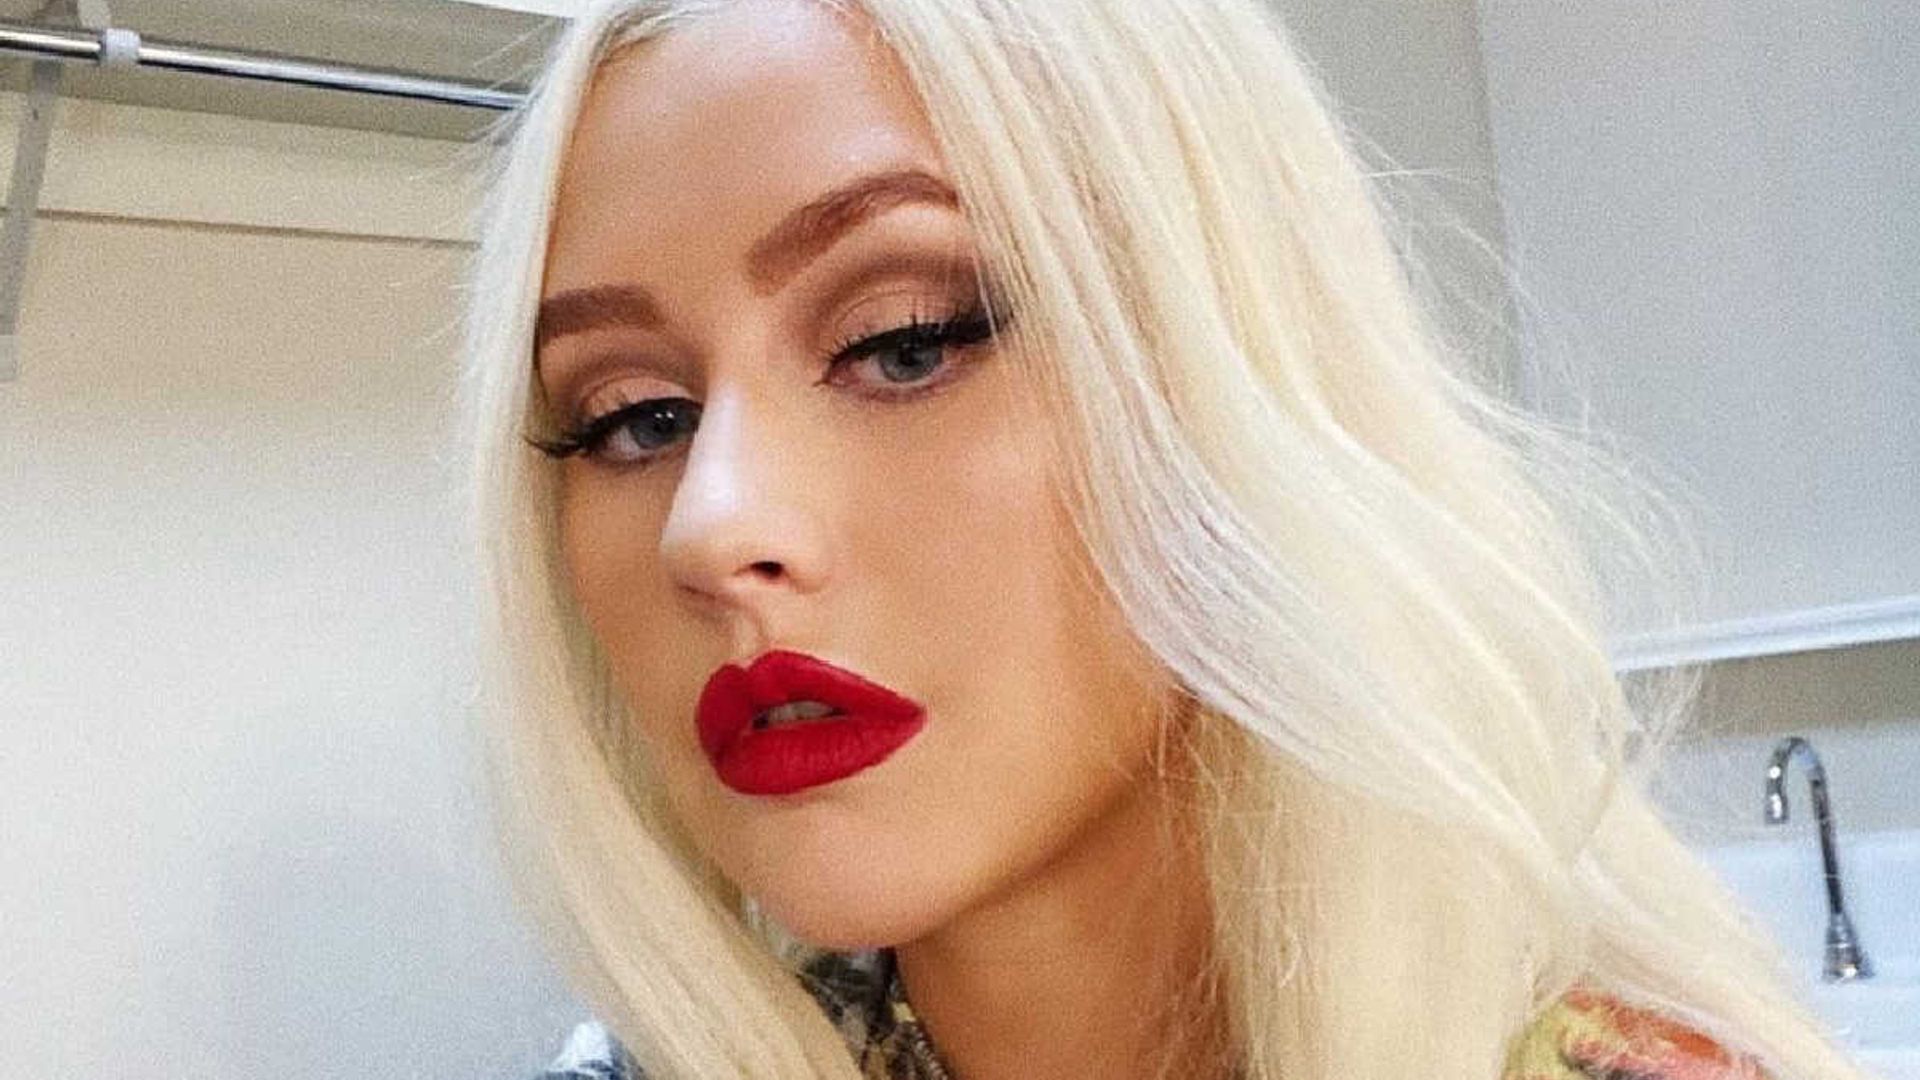 Christina Aguilera rocks a sexy leather girl boss look – and fans all had the same reaction